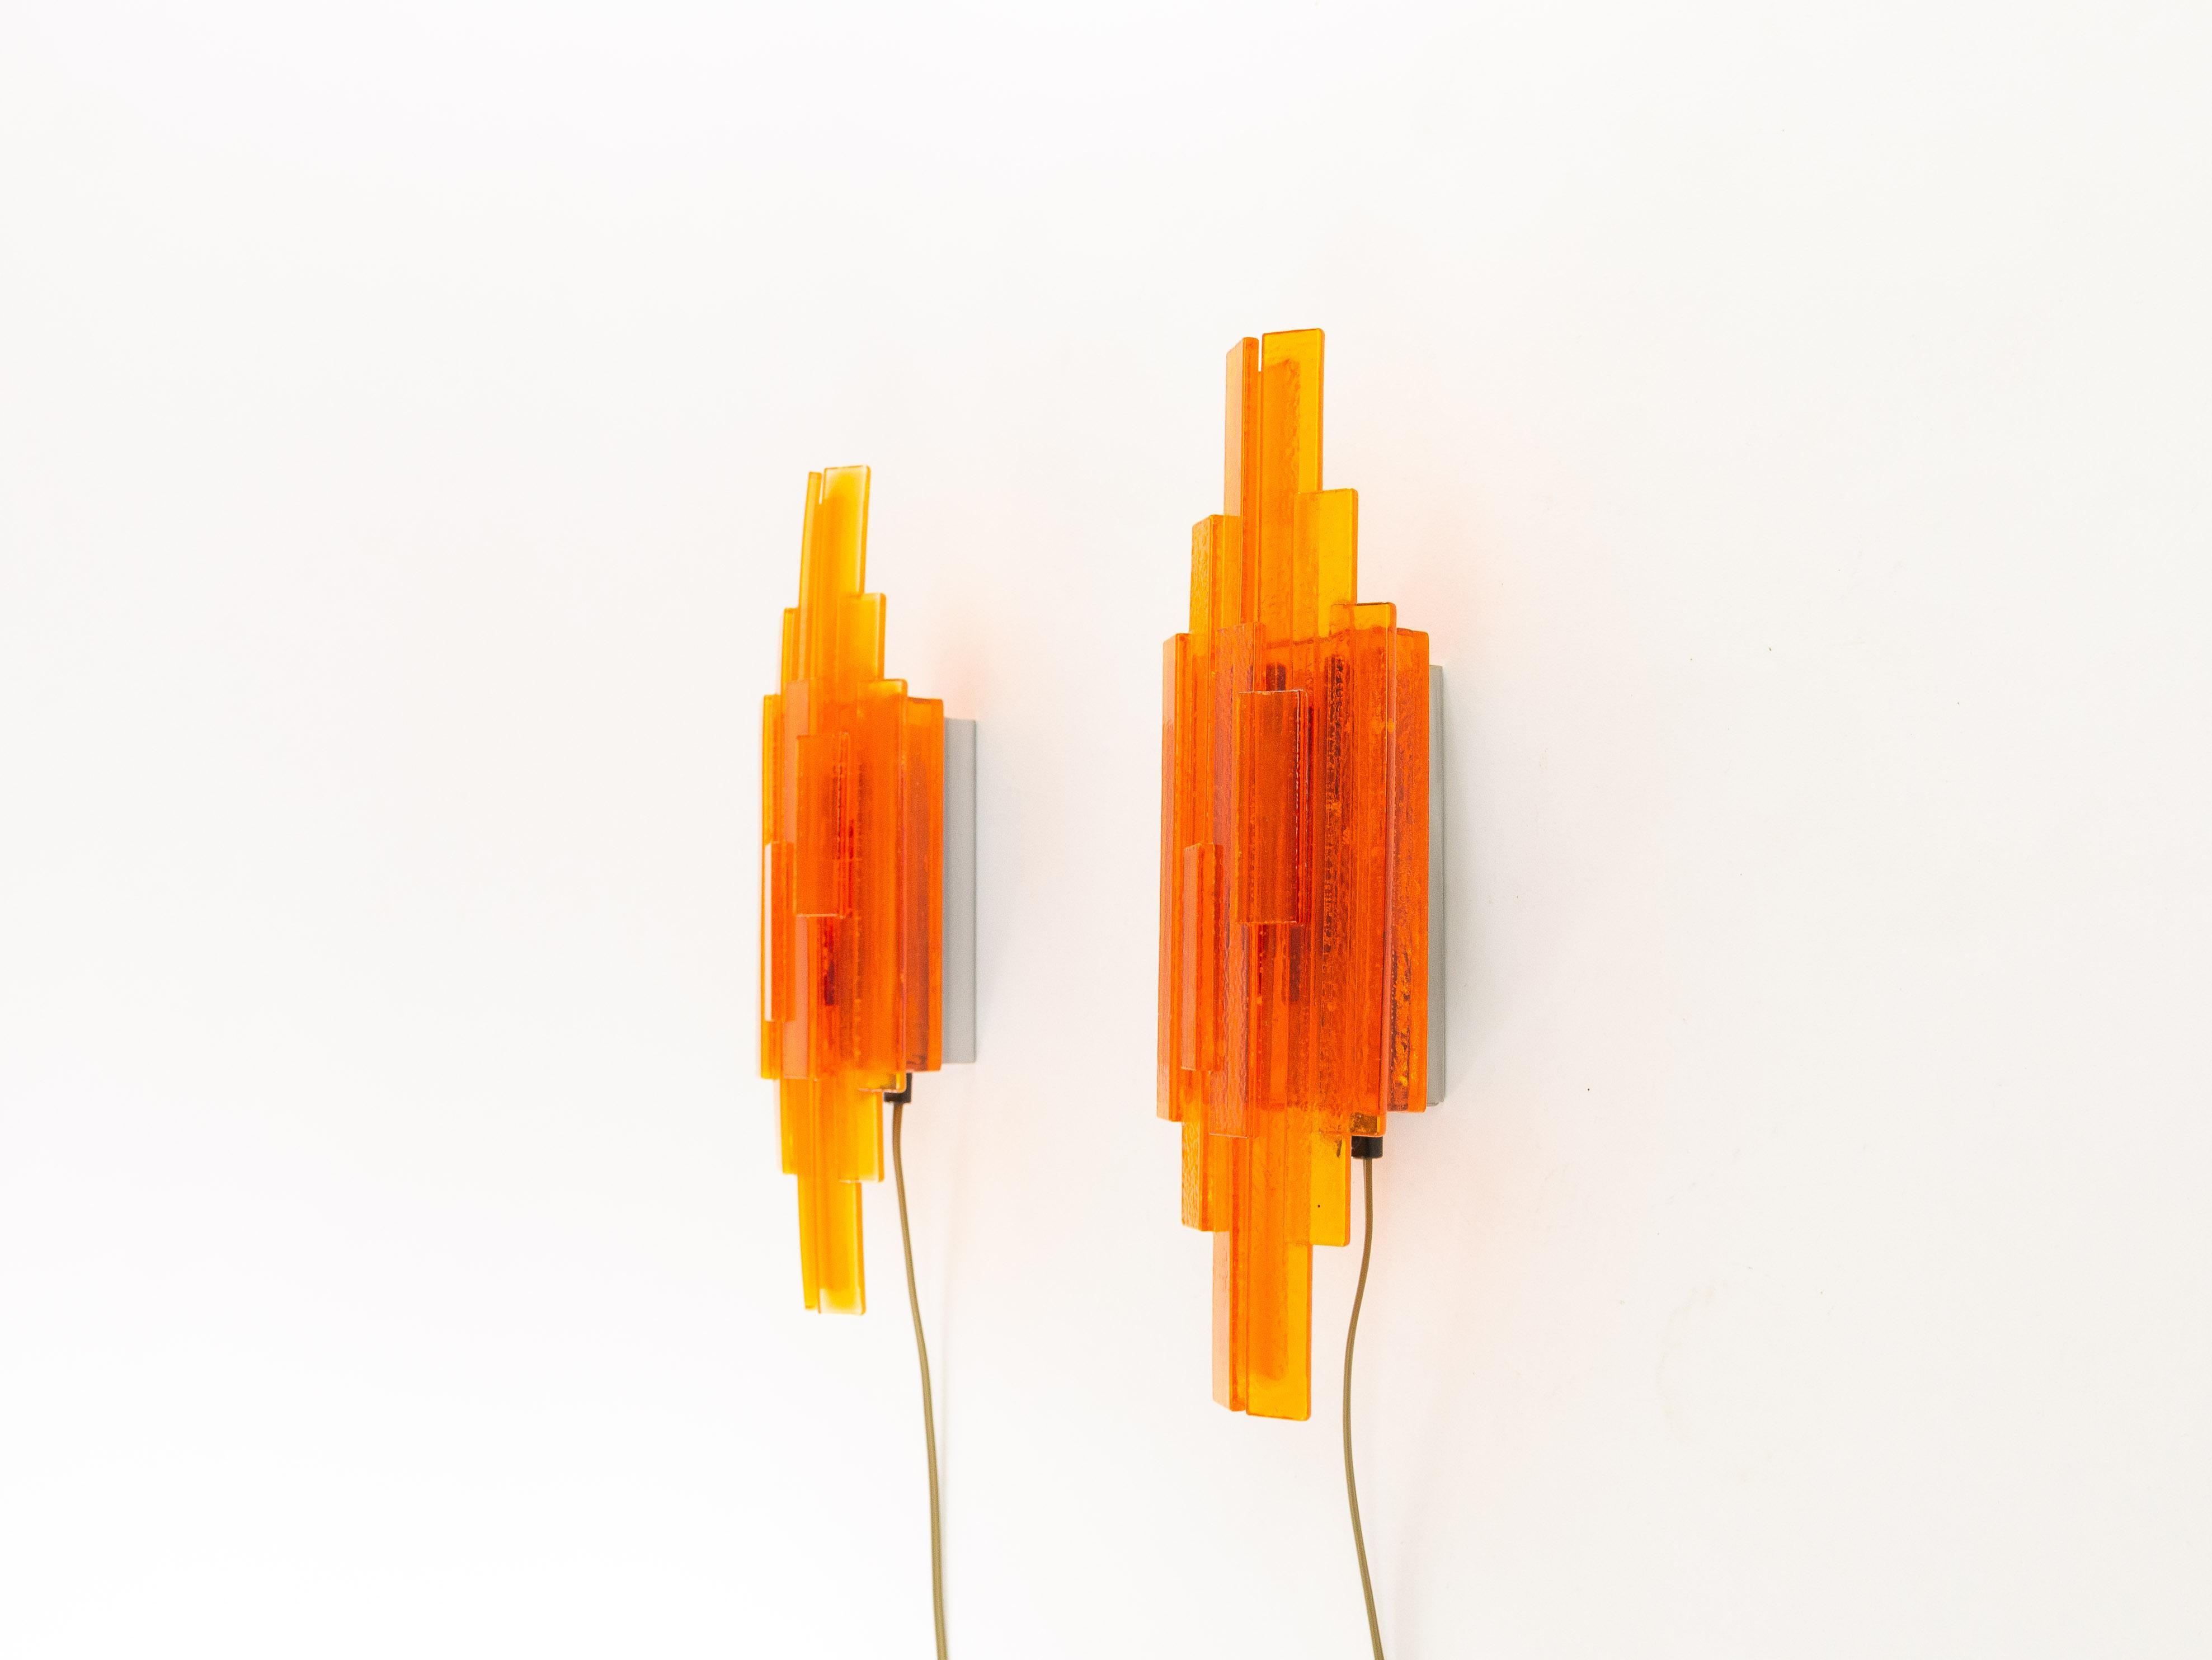 A pair of orange handmade acrylic wall lamps. The sconces were designed by Claus Bolby and manufactured by his own company, Cebo industry. By experimenting, Bolby discovered a technique allowing him to introduce bubbles into the acrylic, which adds